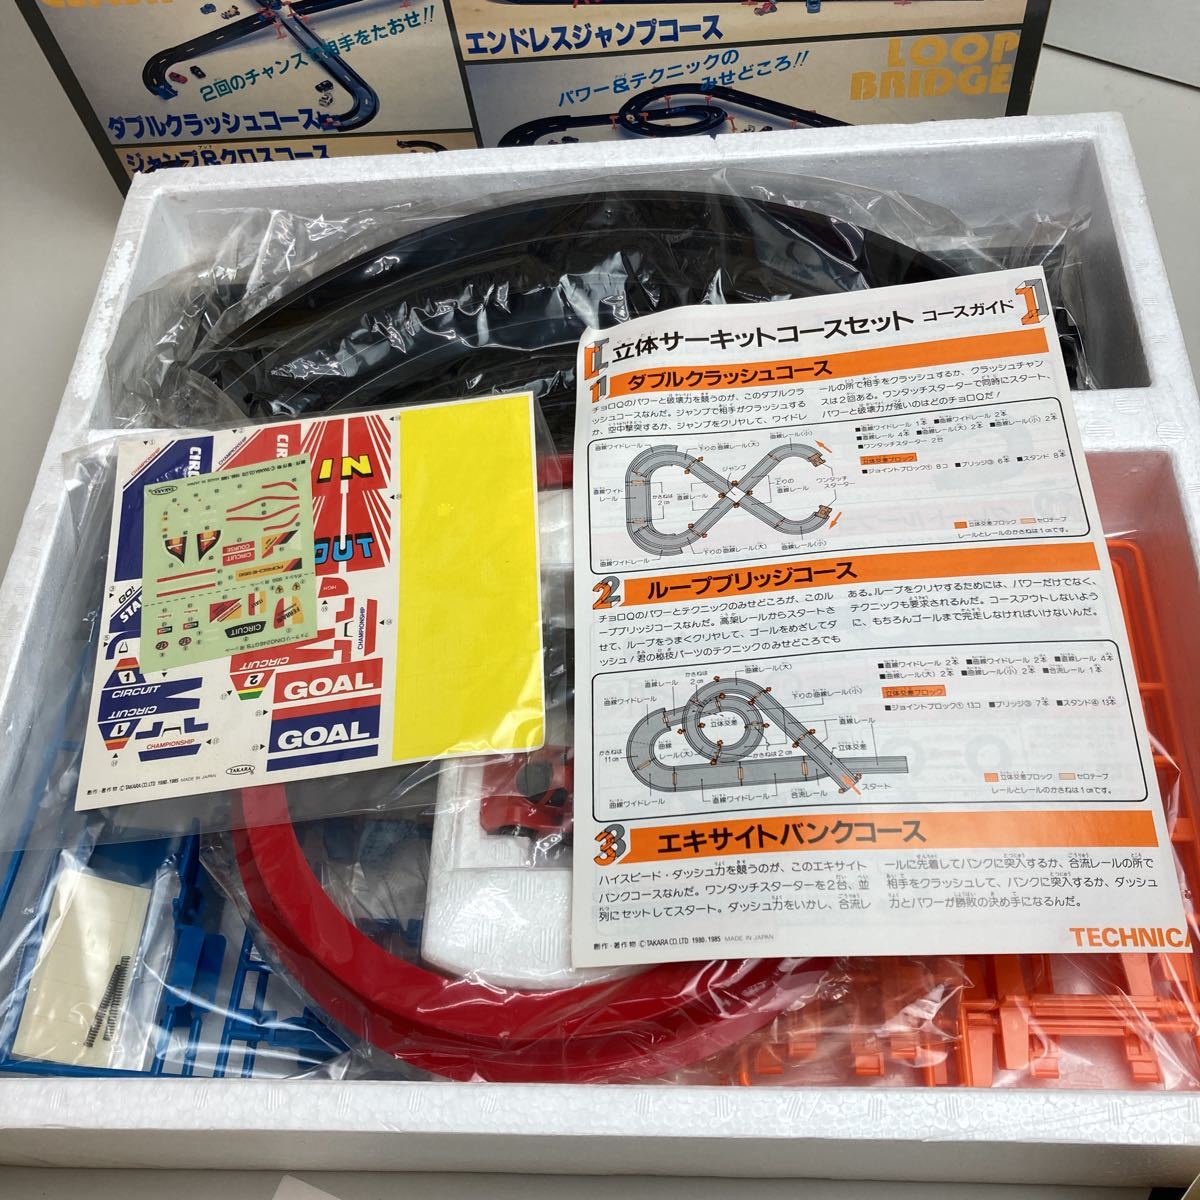 Ж# rare goods #TAKARA# Choro Q# solid circuit course SET#MADE.IN.JP#1985 year # unused goods # beautiful goods # that time thing # Showa Retro # out of print # rare 